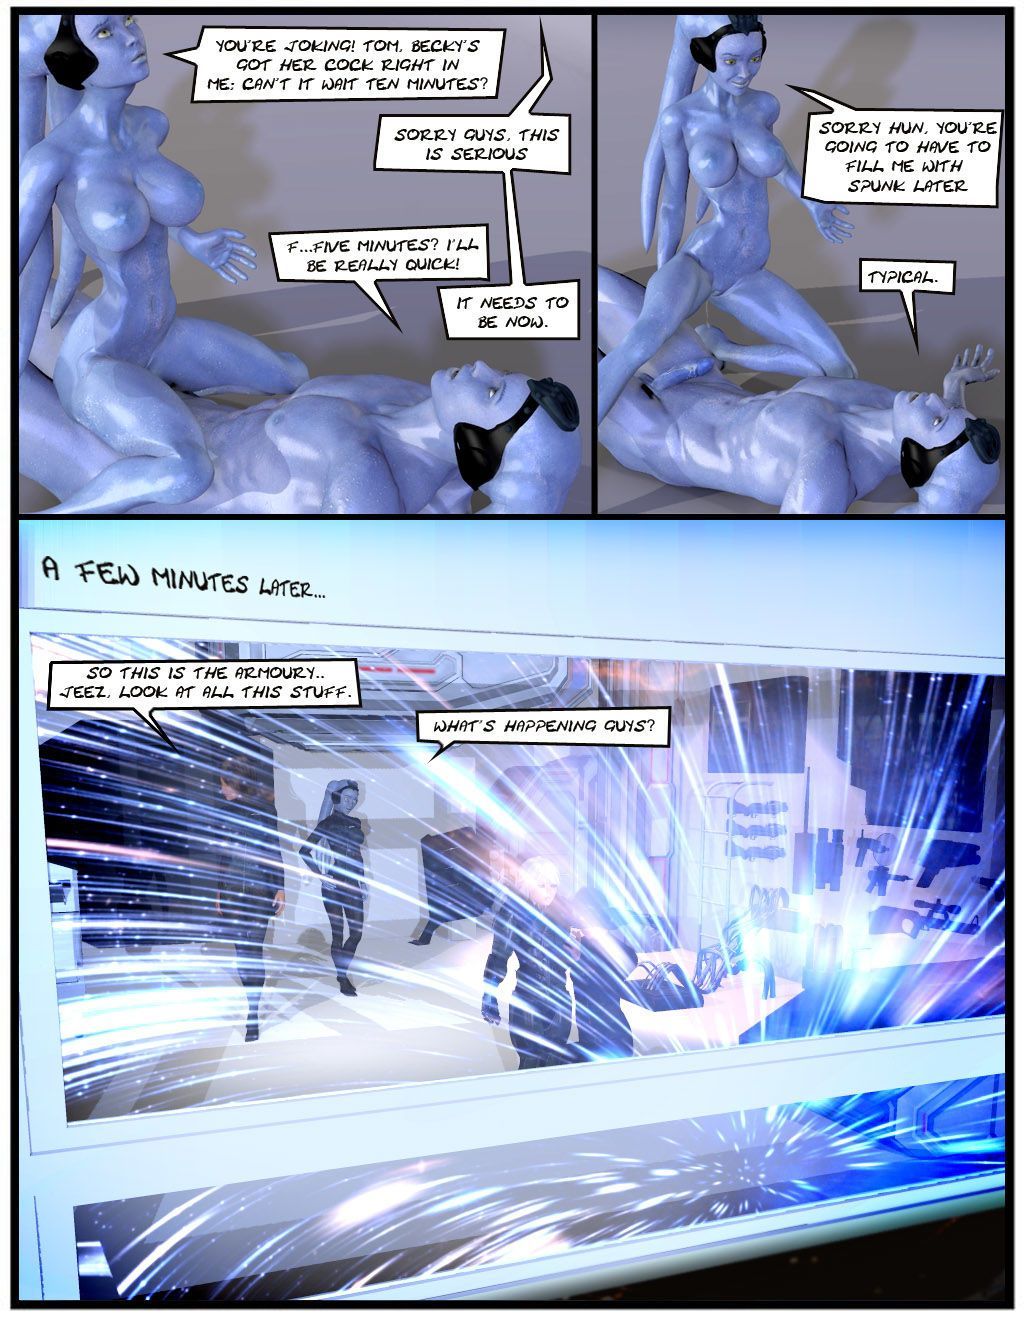 Project Nemesis Comic 8: Breakfast in Tacspace - part 2